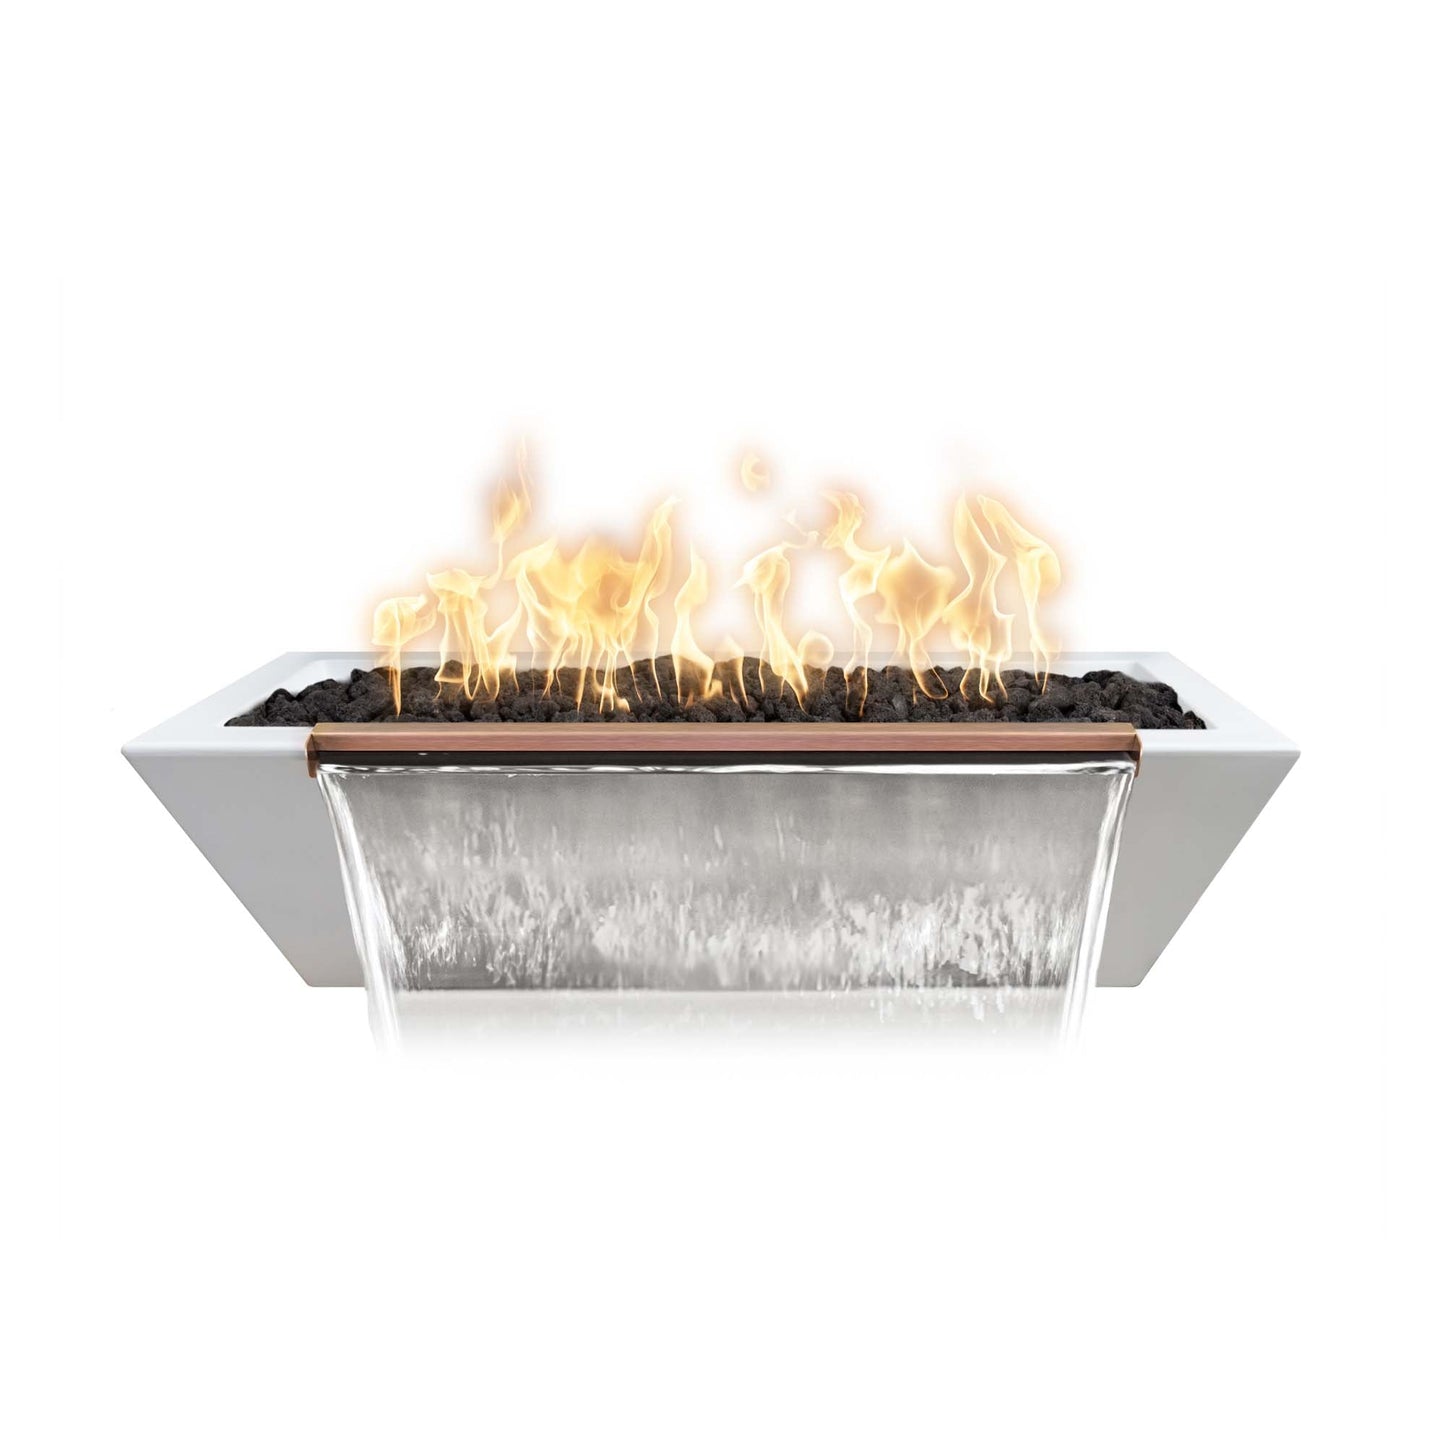 The Outdoor Plus Linear Maya 72" Metallic Slate GFRC Concrete Liquid Propane Fire & Water Bowl with Match Lit Ignition